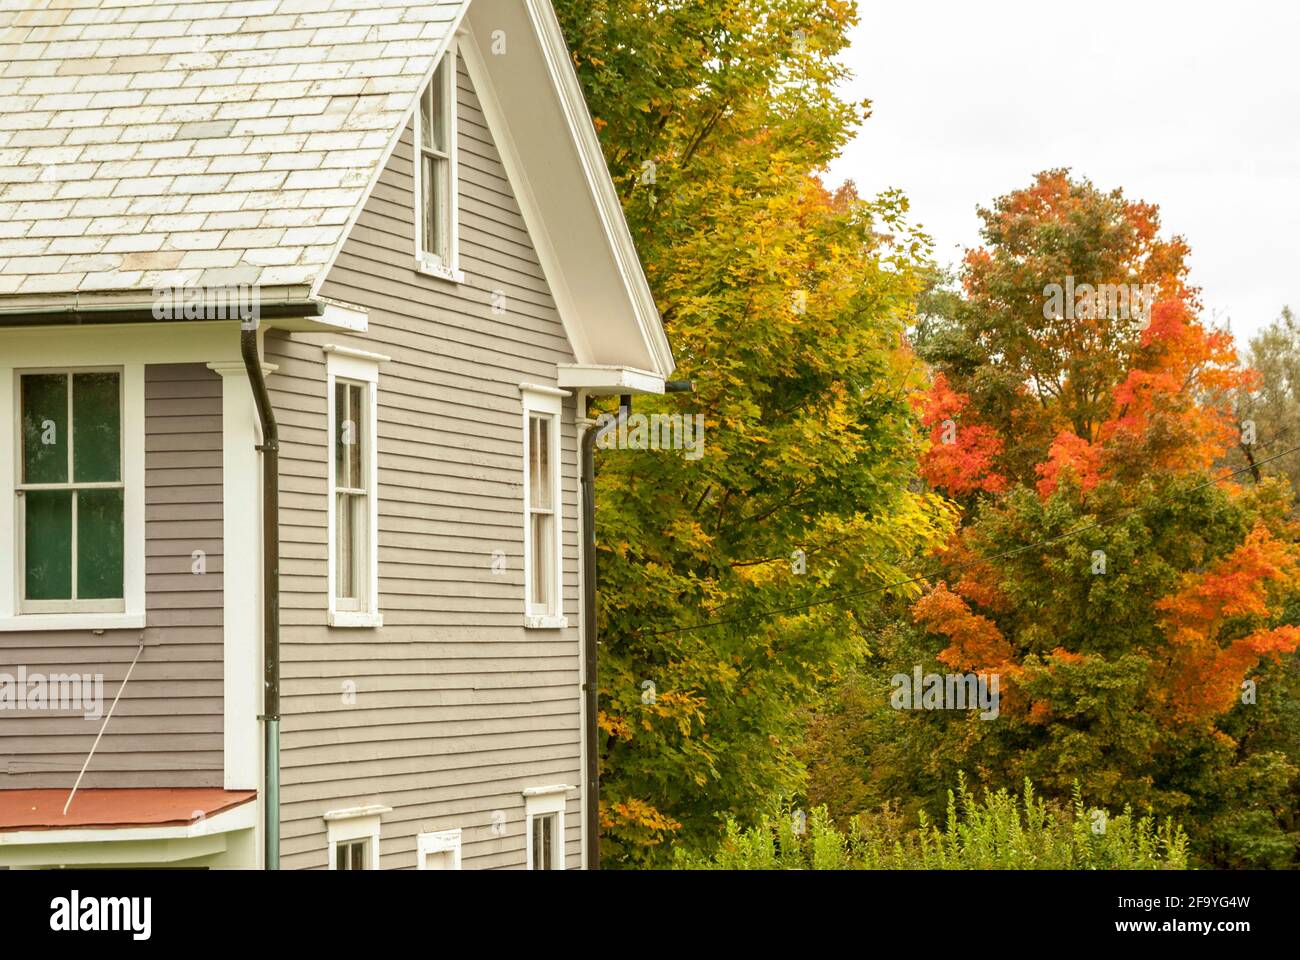 A white/ grey  (gray) clapperboard house in the Canterbury Shaker Village, New Hampshire, USA with autumn / fall foliage on the trees behind. Stock Photo